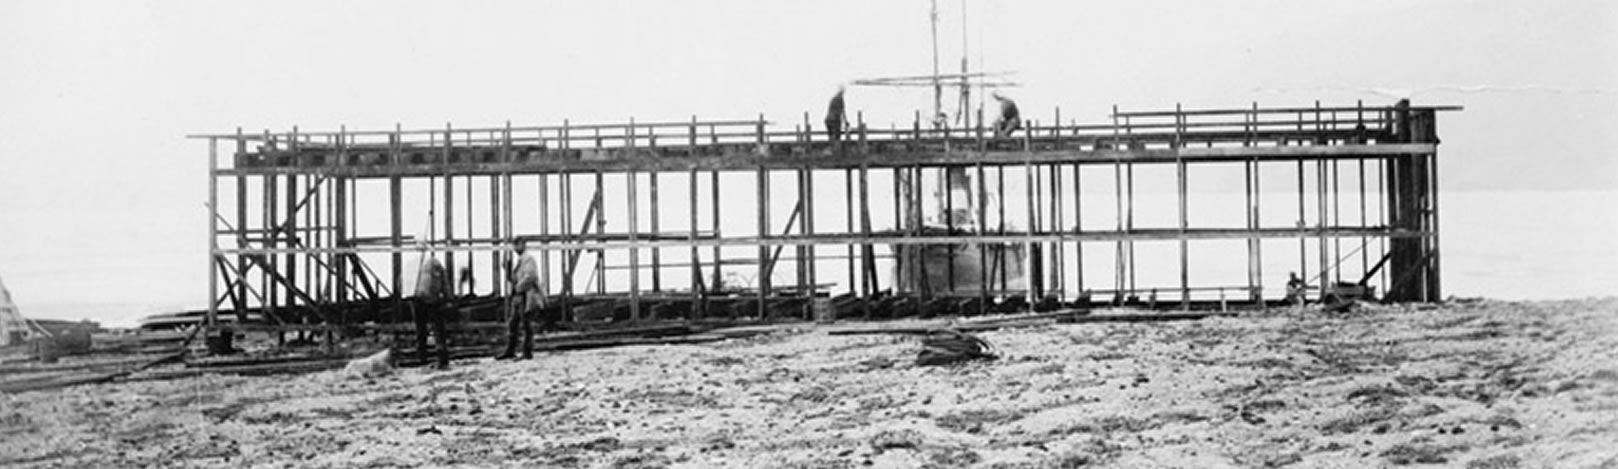 Historic image of Lady Franklin Bay Expedition House under construction. The bow of the Proteus is visible in Discovery Harbor. Two figures stand on the wooden frame of the building. One figure is visible near the sill plate.